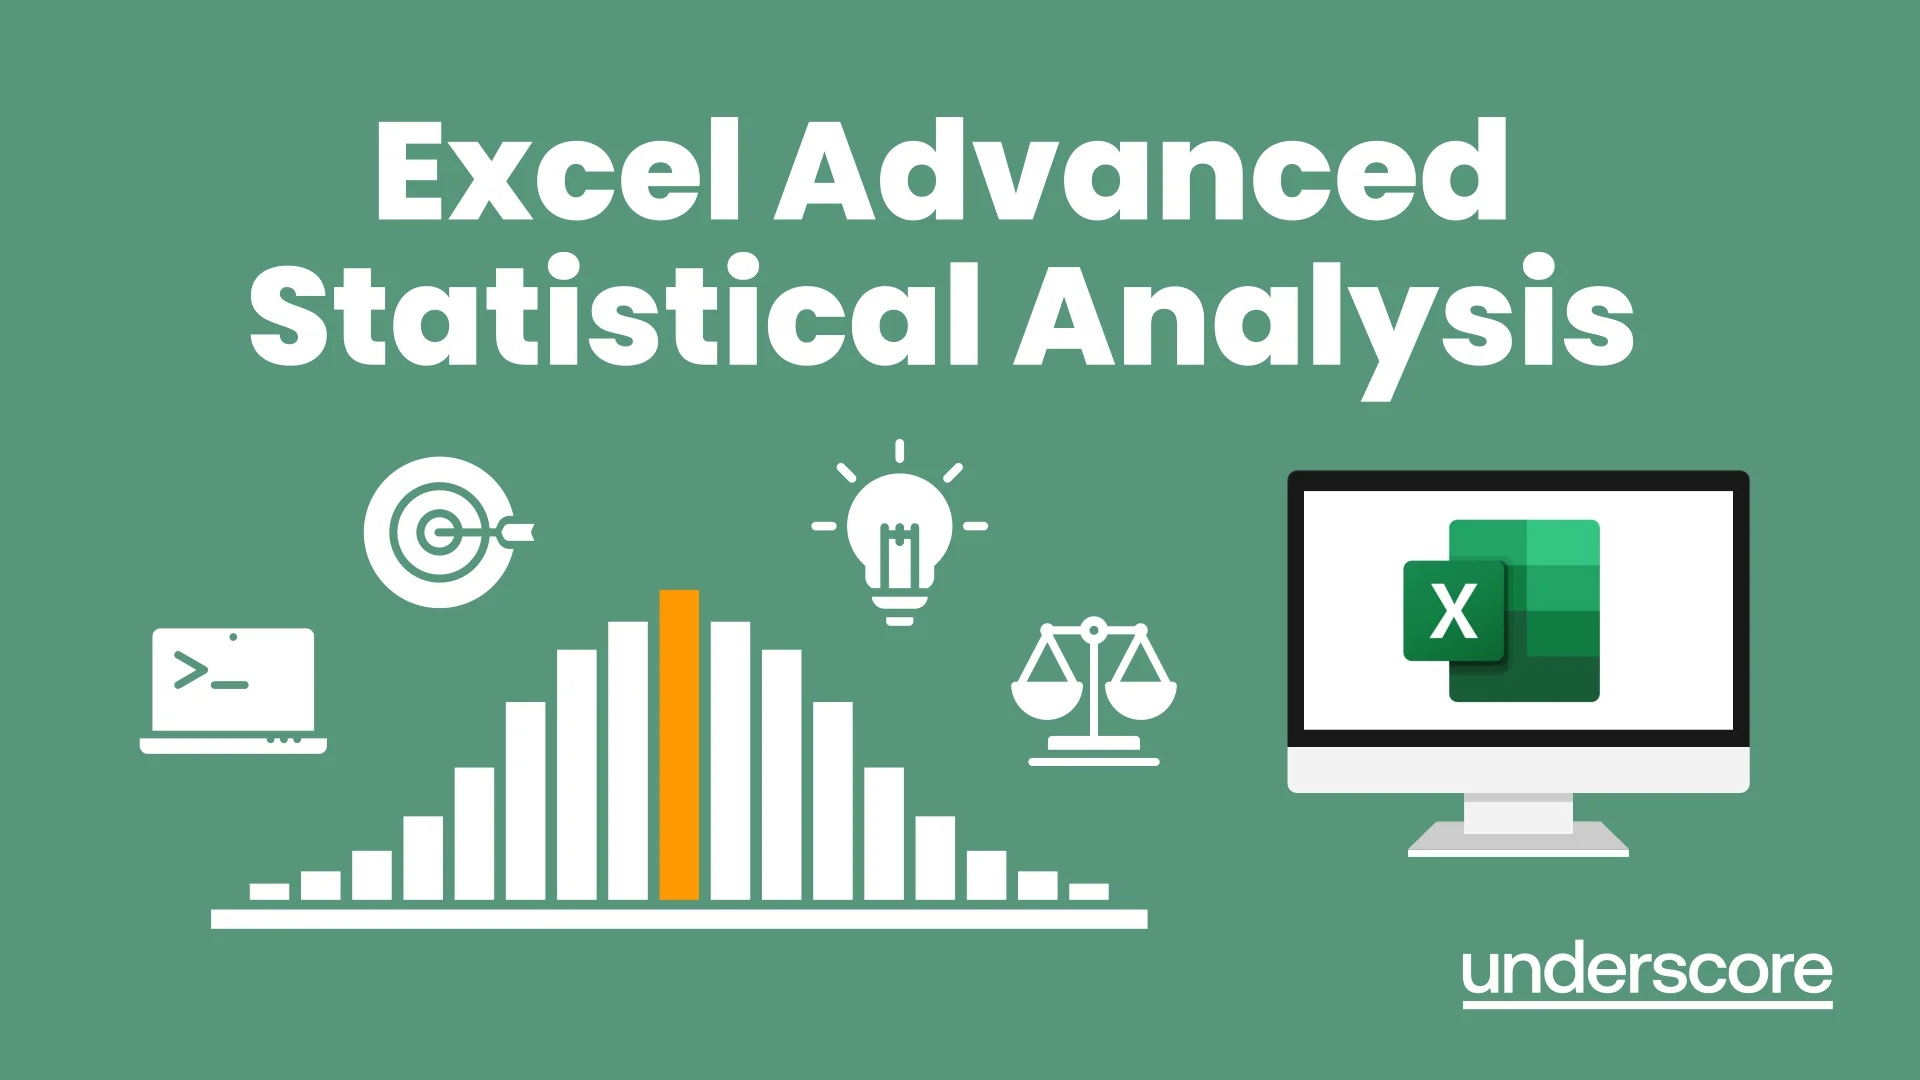 Excel Advanced Statistical Analysis